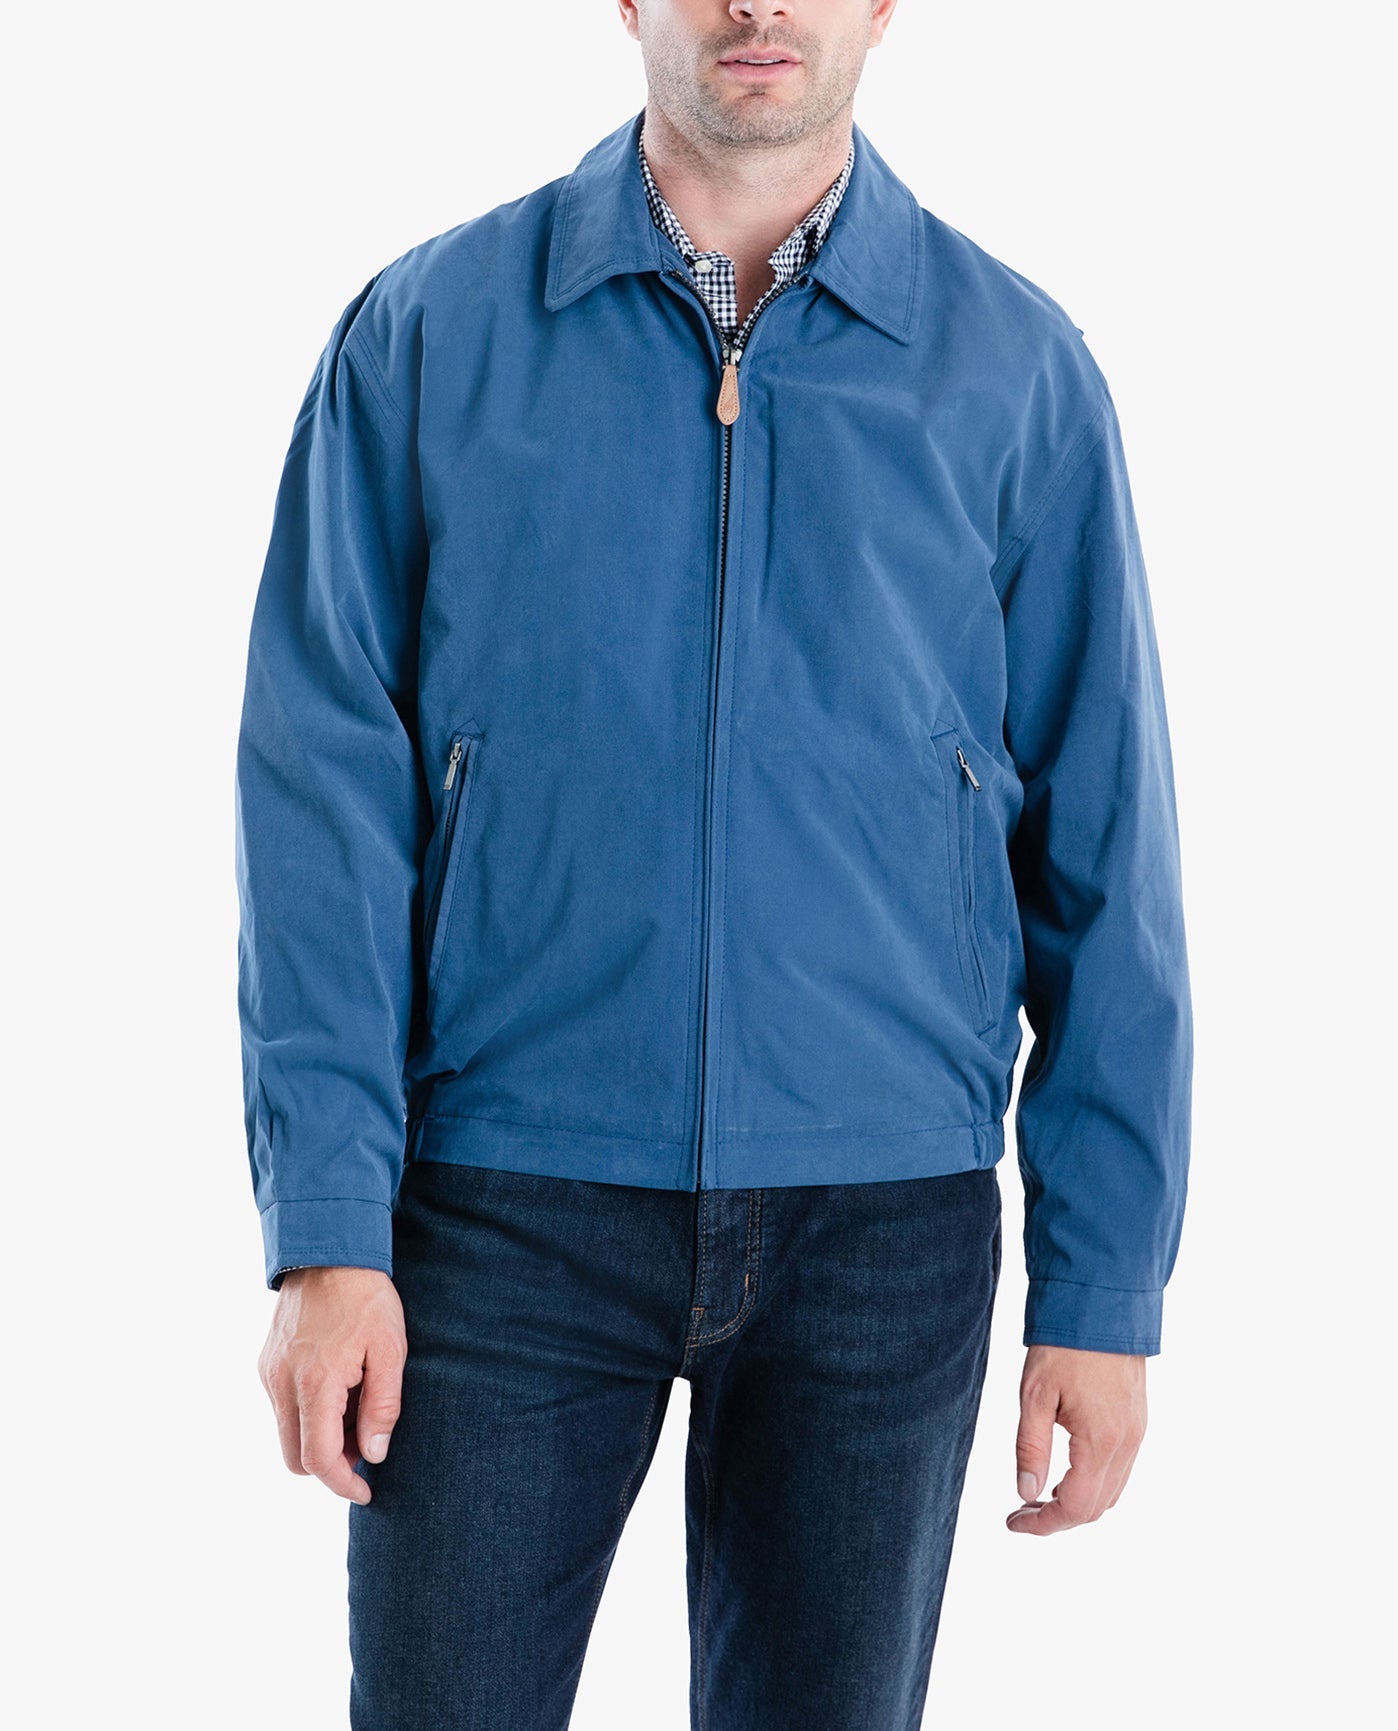 FRONT VIEW OF LIGHT WEIGHT ZIP FRONT GOLF JACKET | PACIFIC BLUE